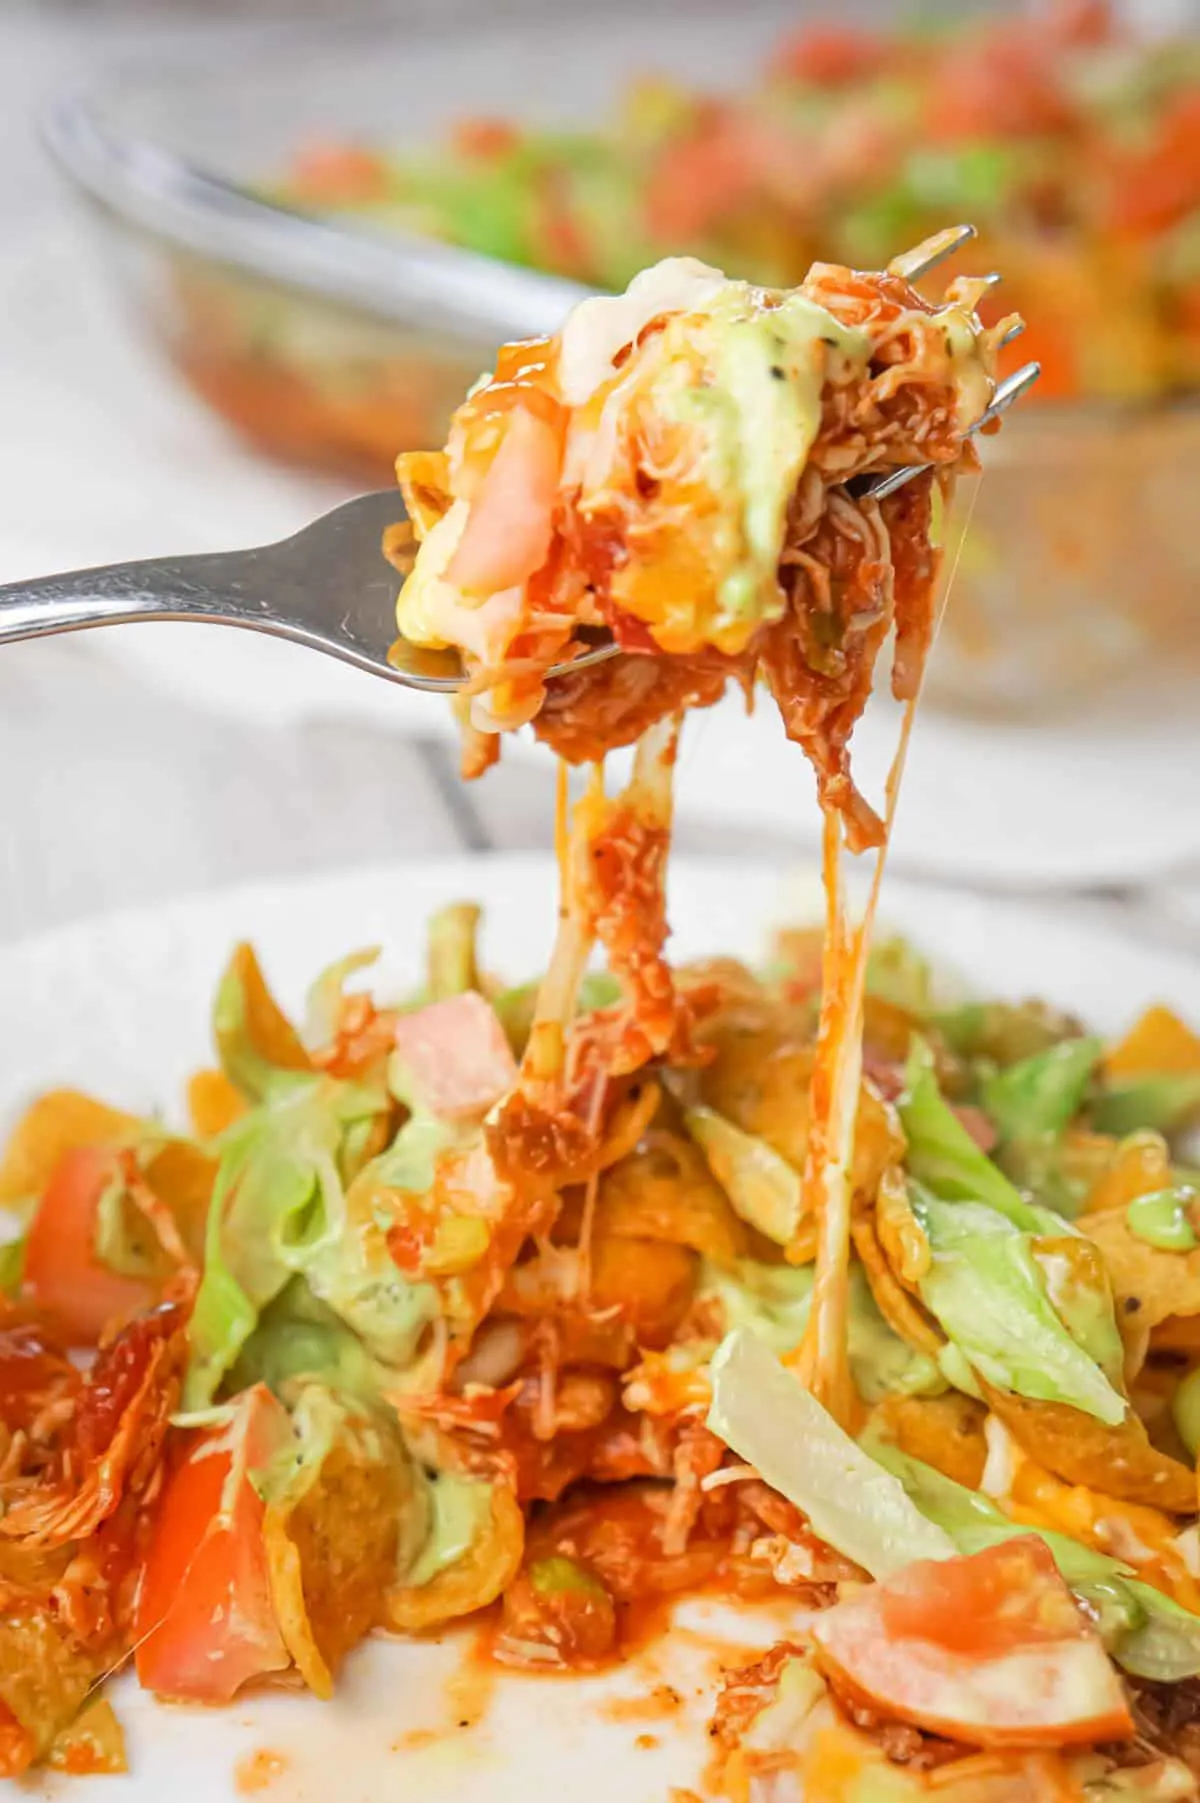 Chicken Taco Frito Pie is an easy weeknight dinner recipe made with shredded chicken tossed in salsa, taco seasoning and chili sauce and topped with cheese, Fritos corn chips, avocado dip, shredded lettuce and diced tomatoes.